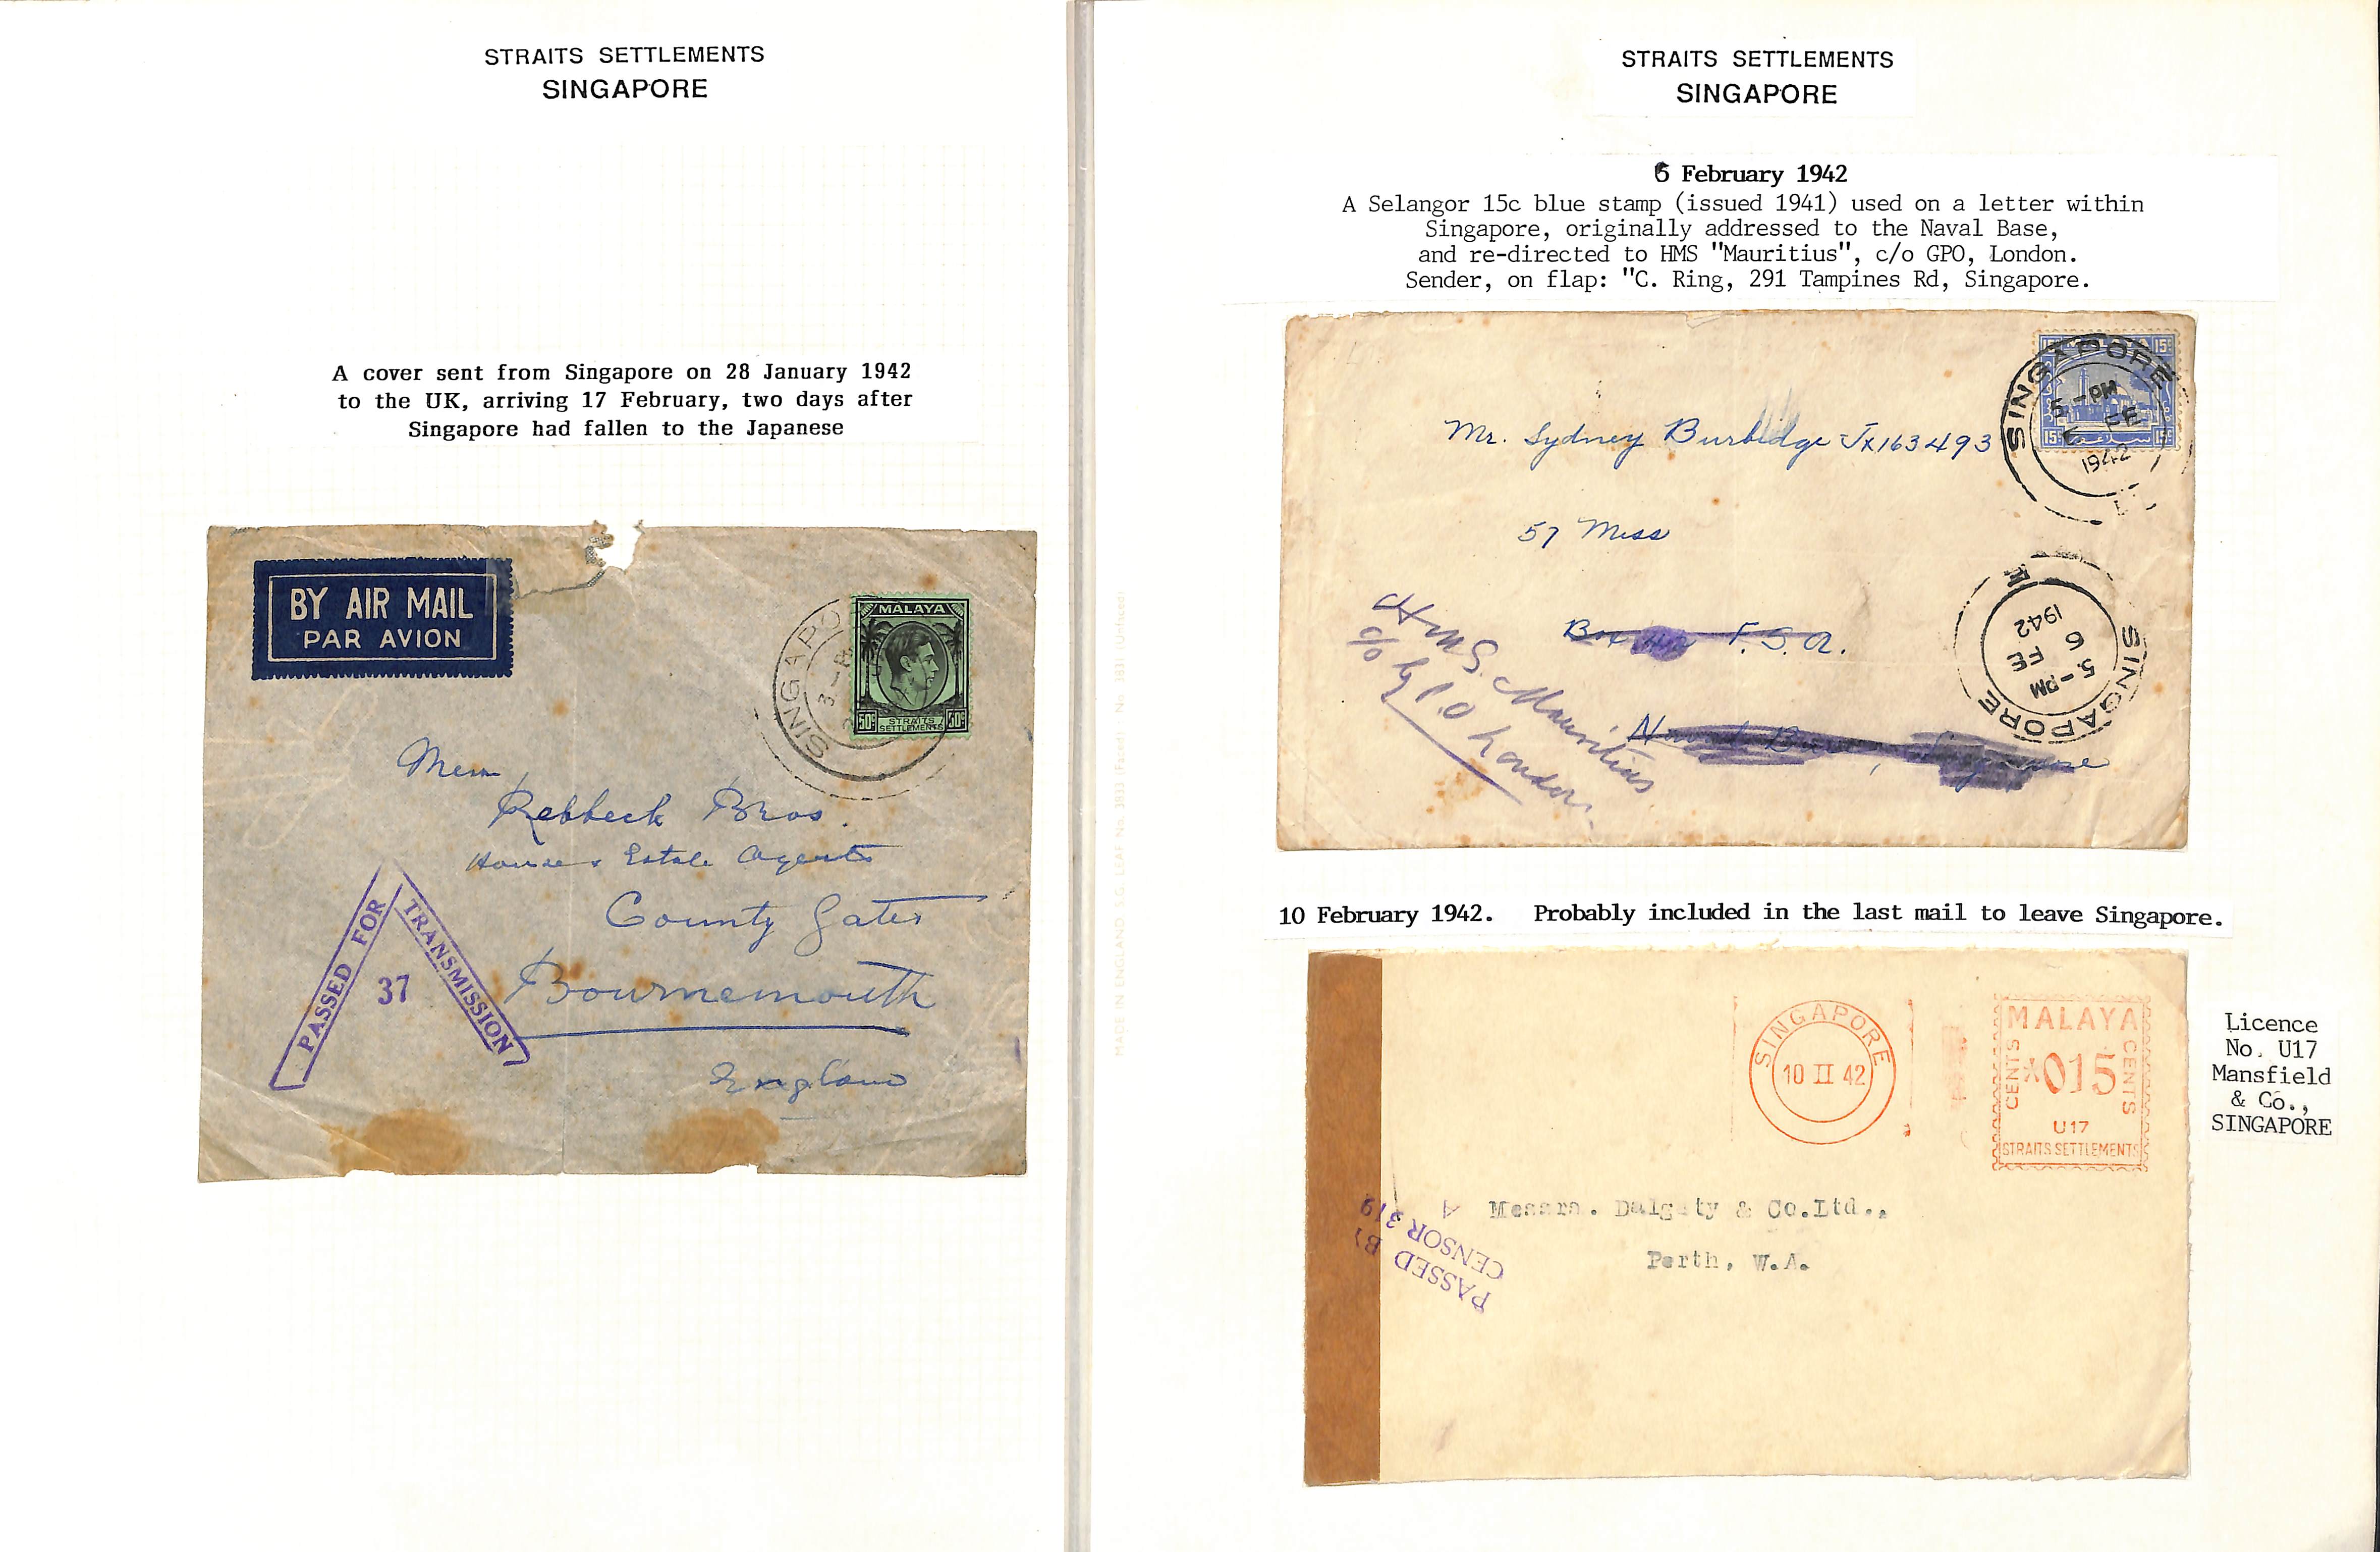 1942 (Jan 27 - Feb 10) Covers sent shortly before the fall of Singapore, comprising 1941 (Dec 1)